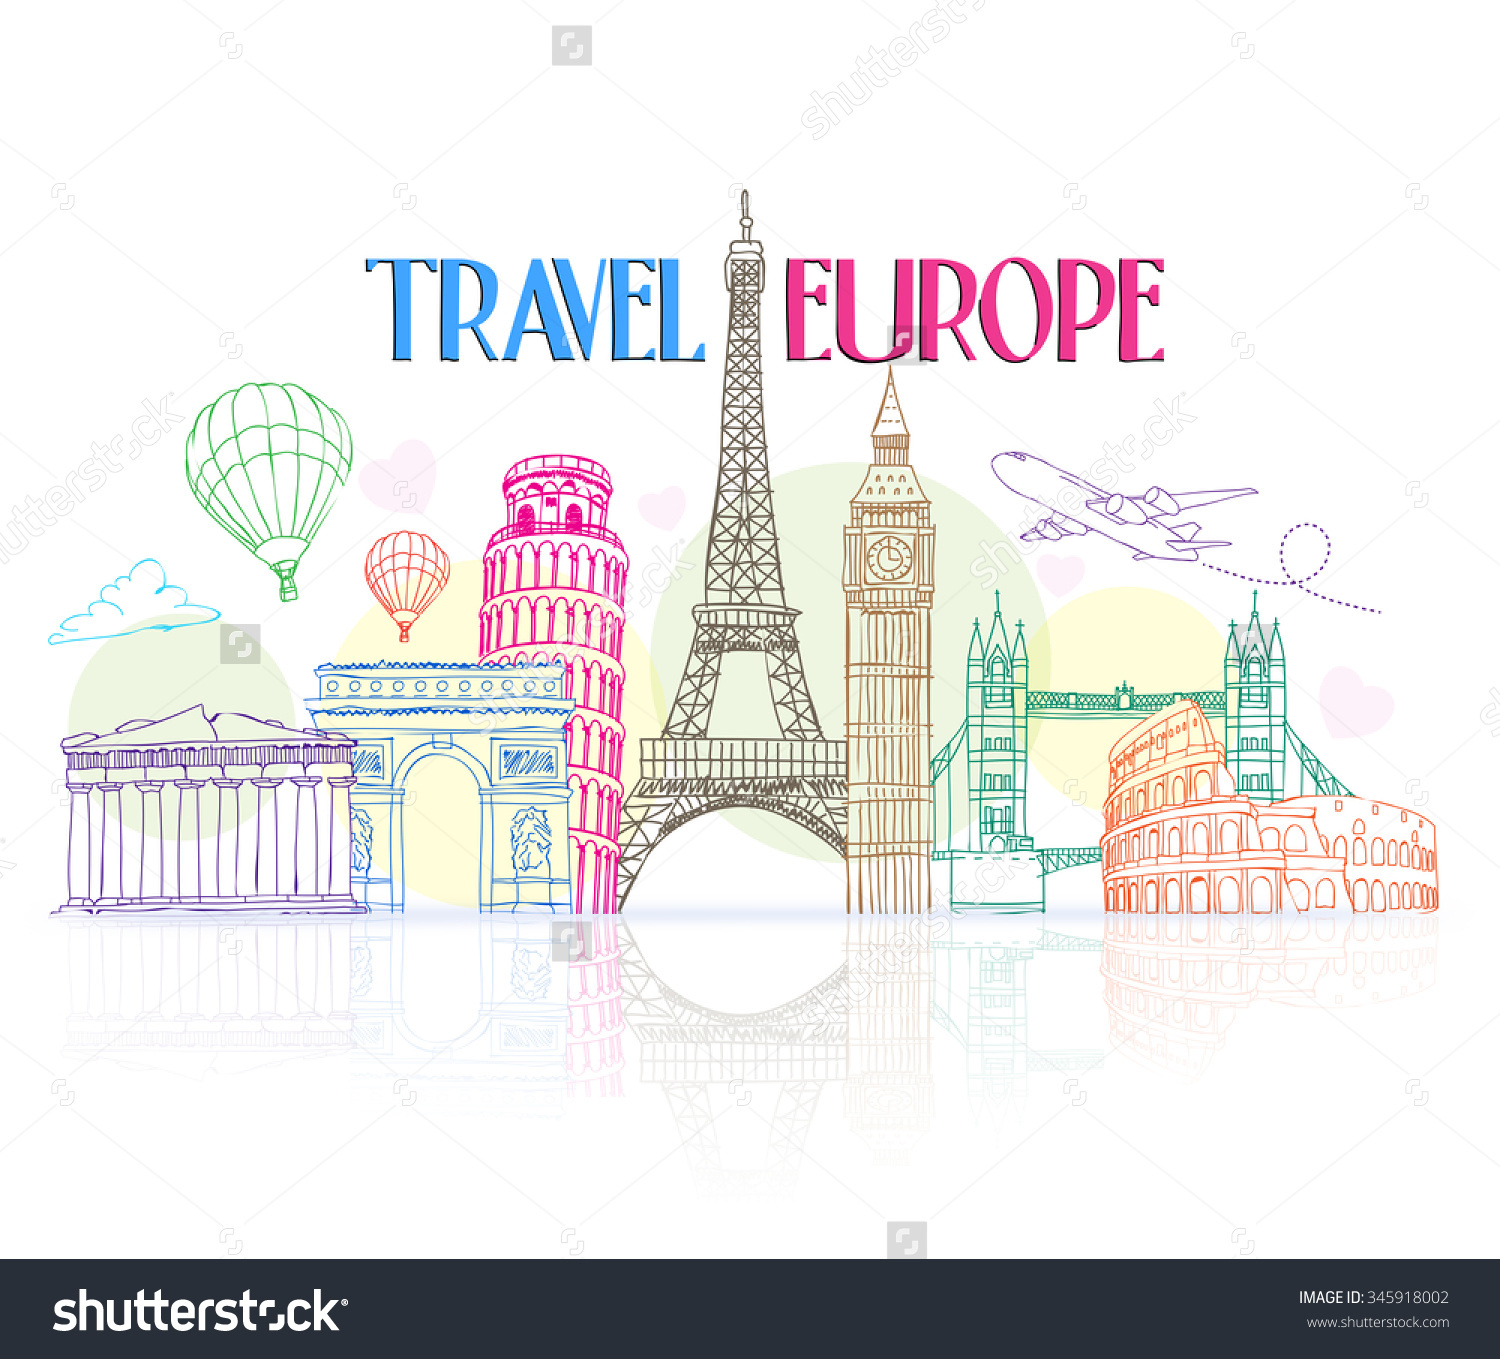 Europe travel clipart - Clipground